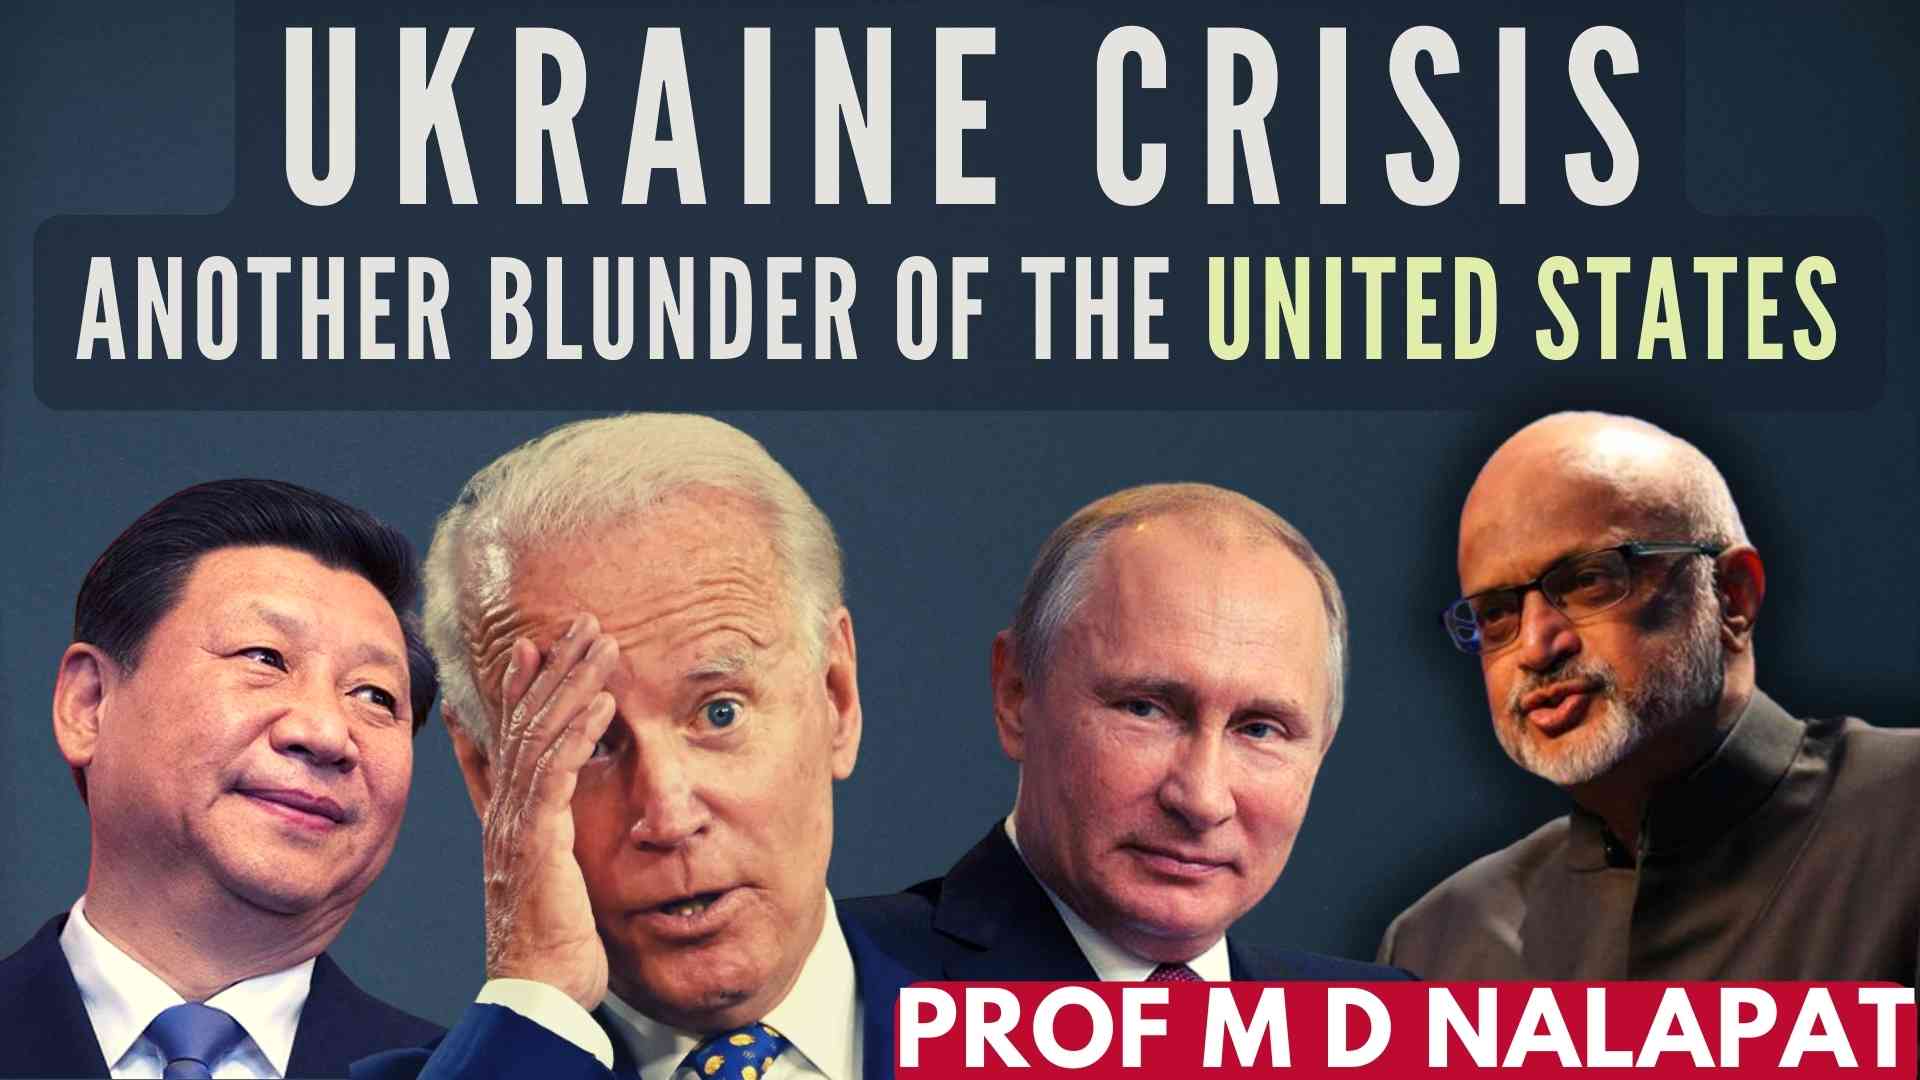 Where did the United States go wrong, while dealing with Russia? Why did the Biden administration shift focus away from China to Russia as the adversary? This and other missteps are what has brought this about, says Prof M D Nalapat.